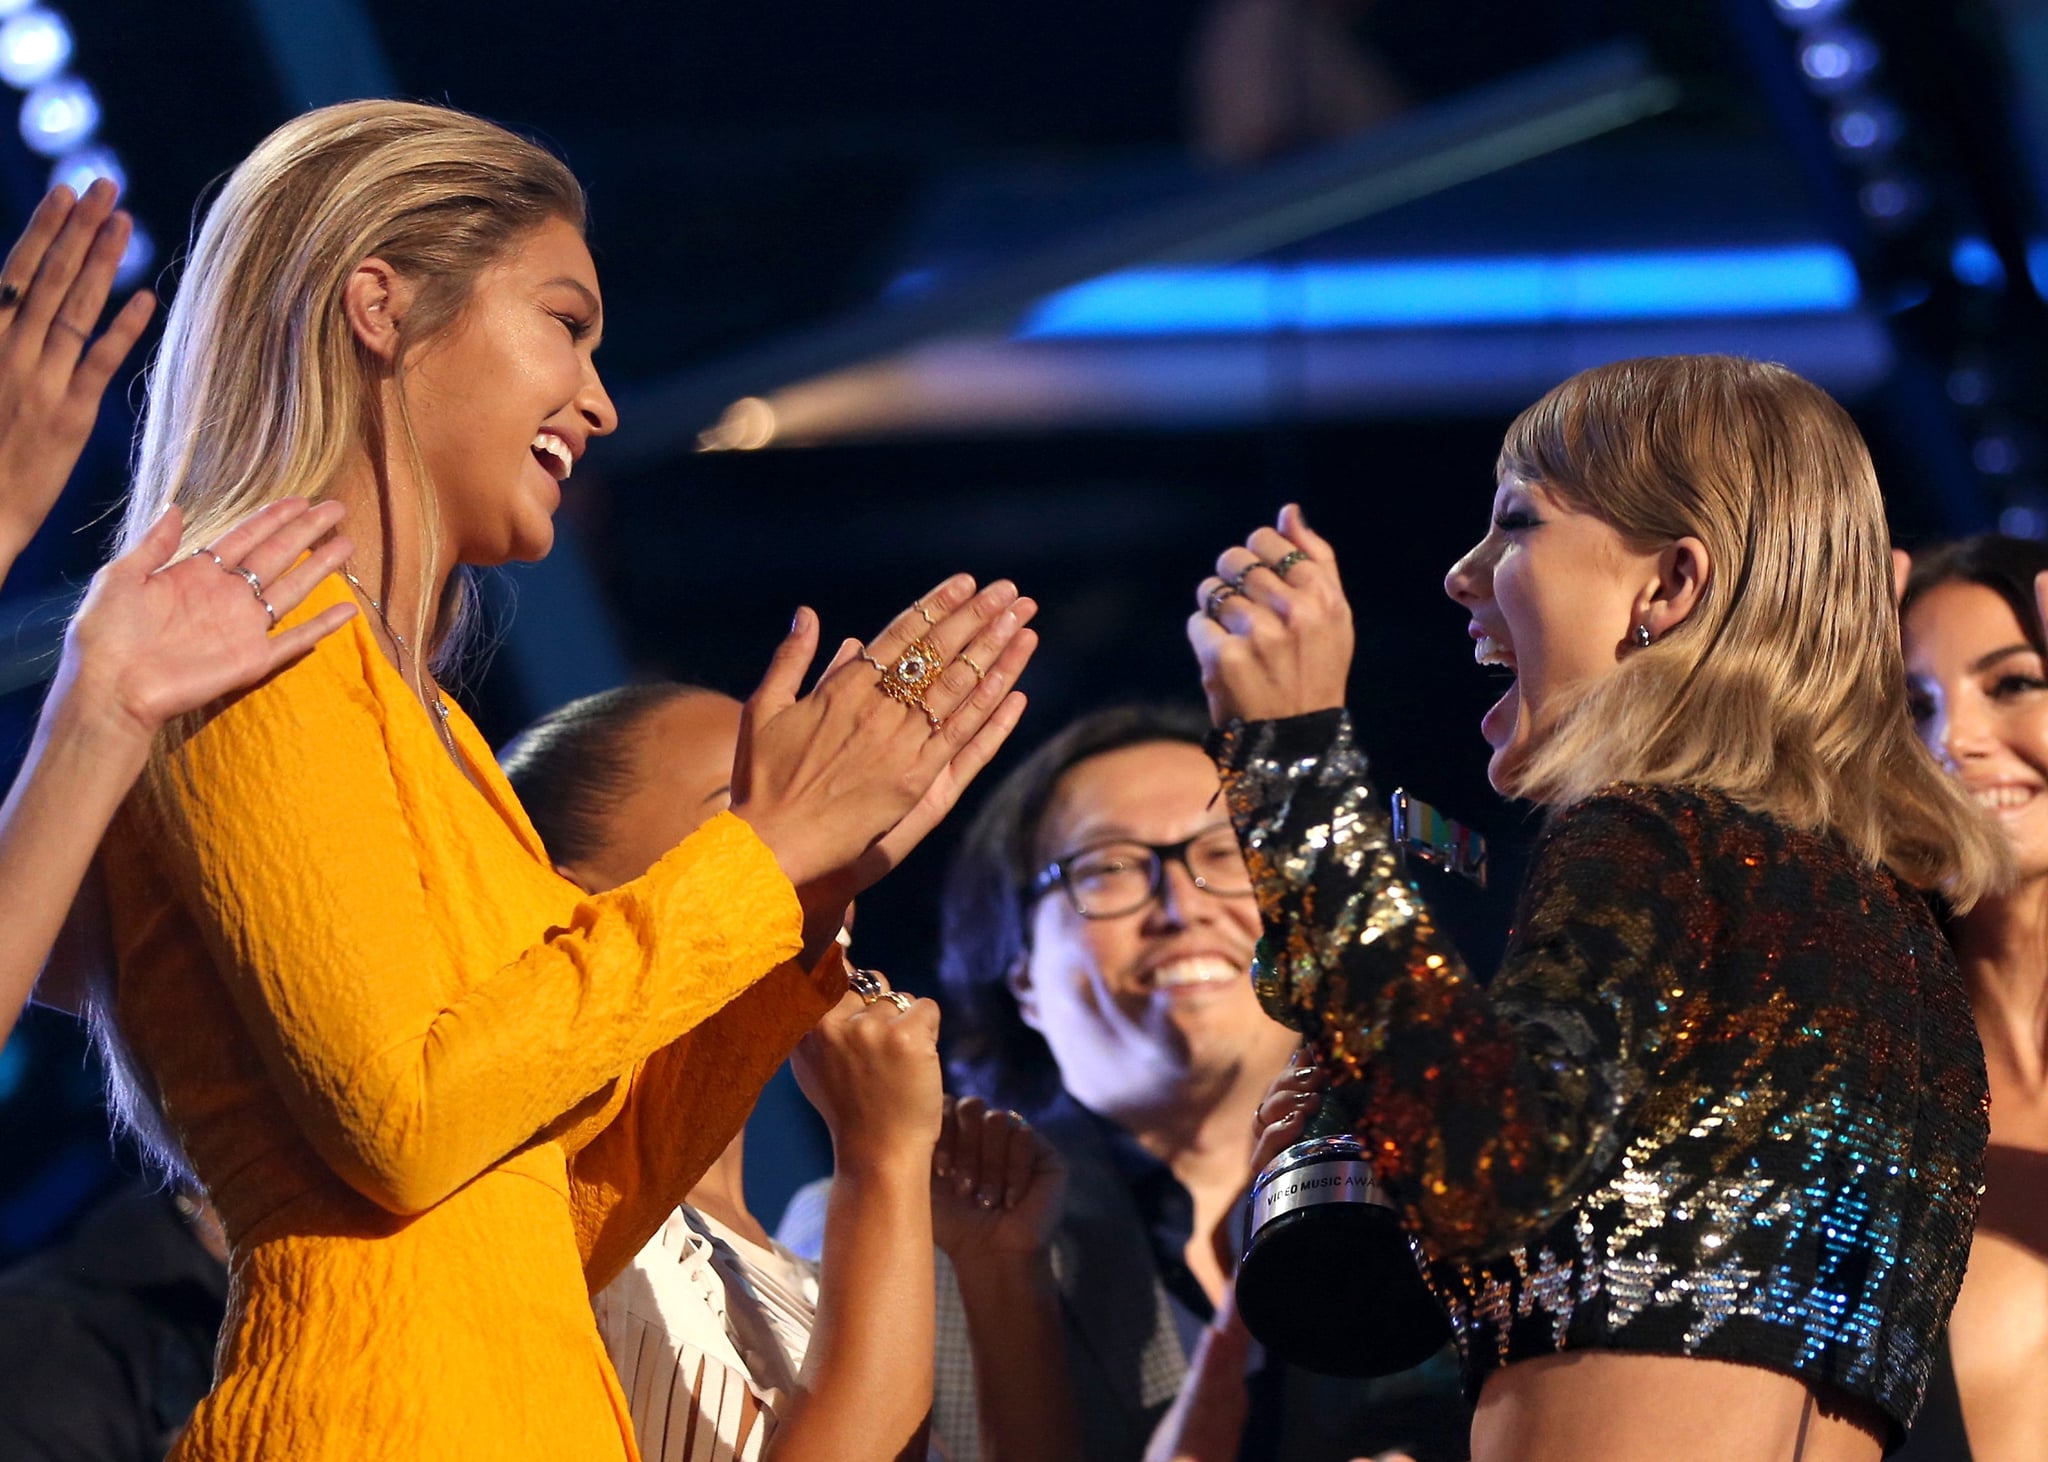 LOS ANGELES, CA - AUGUST 30:  Model Gigi Hadid (L) and recording artist Taylor Swift celebrate during the 2015 MTV Video Music Awards at Microsoft Theatre on August 30, 2015 in Los Angeles, California.  (Photo by Christopher Polk/MTV1415/Getty Images)